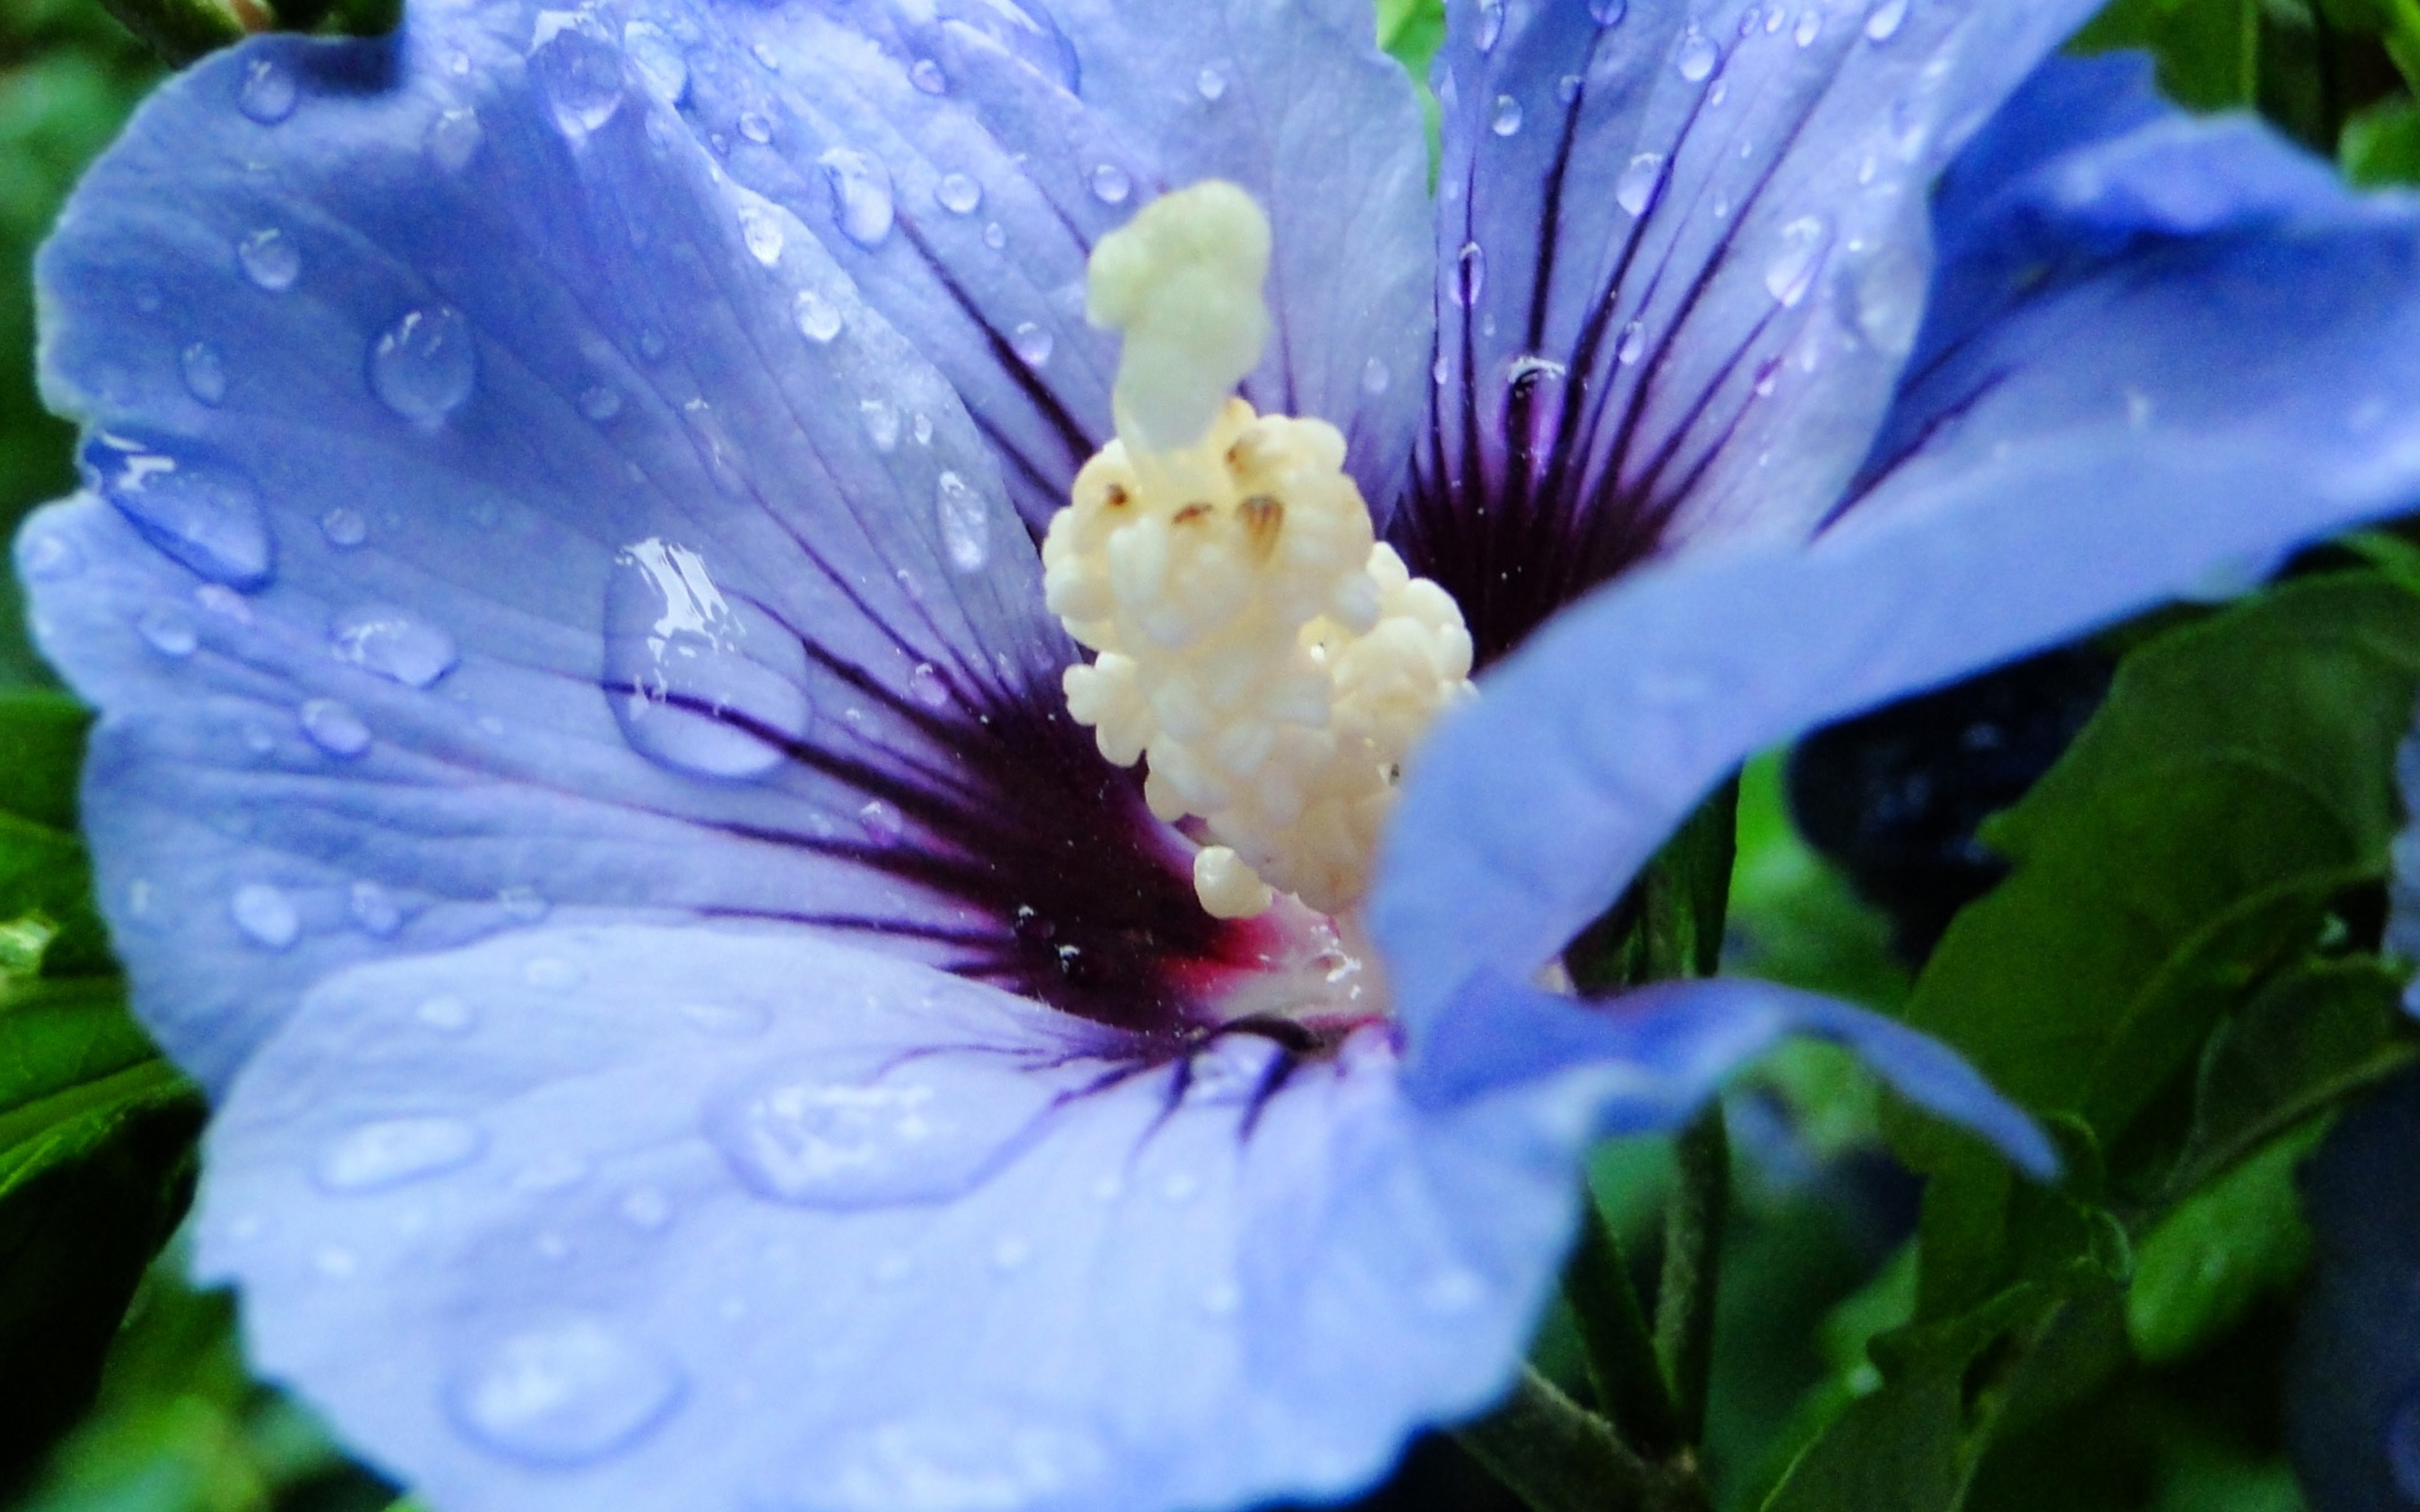 Beautiful blue flower in the morning - macro drops of water